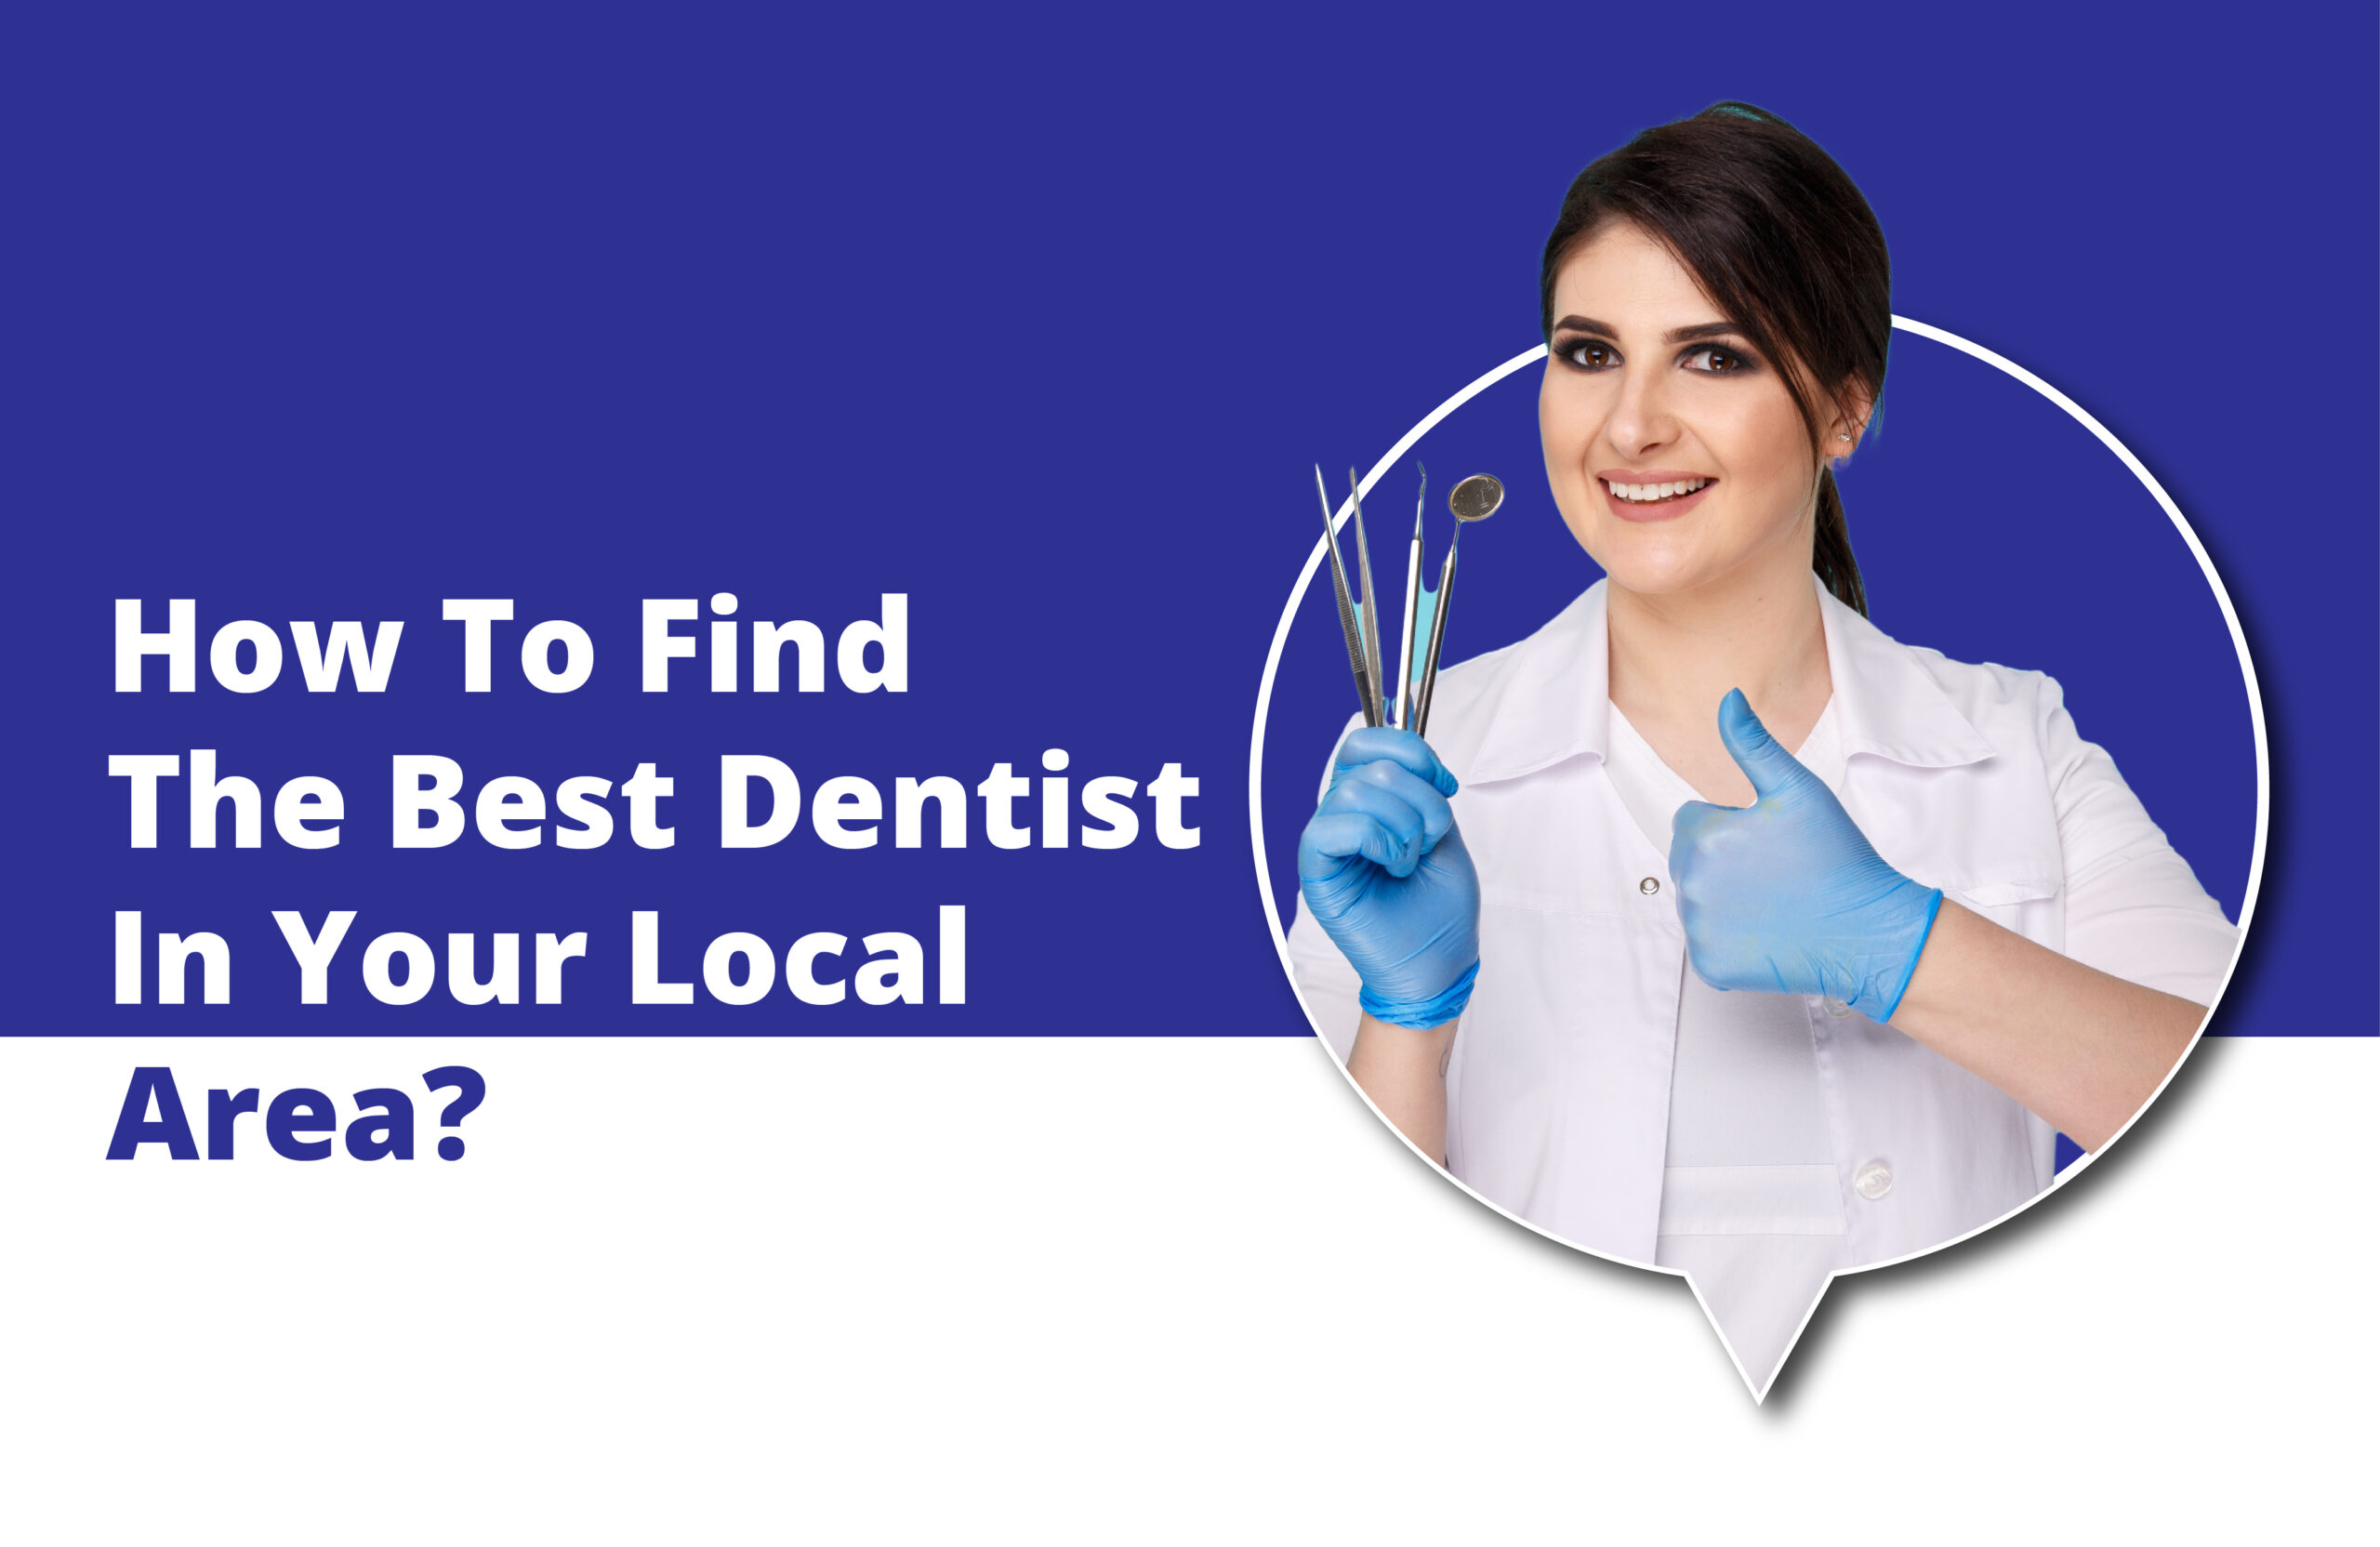 How To Find The Best Dentist In Your Local Area?